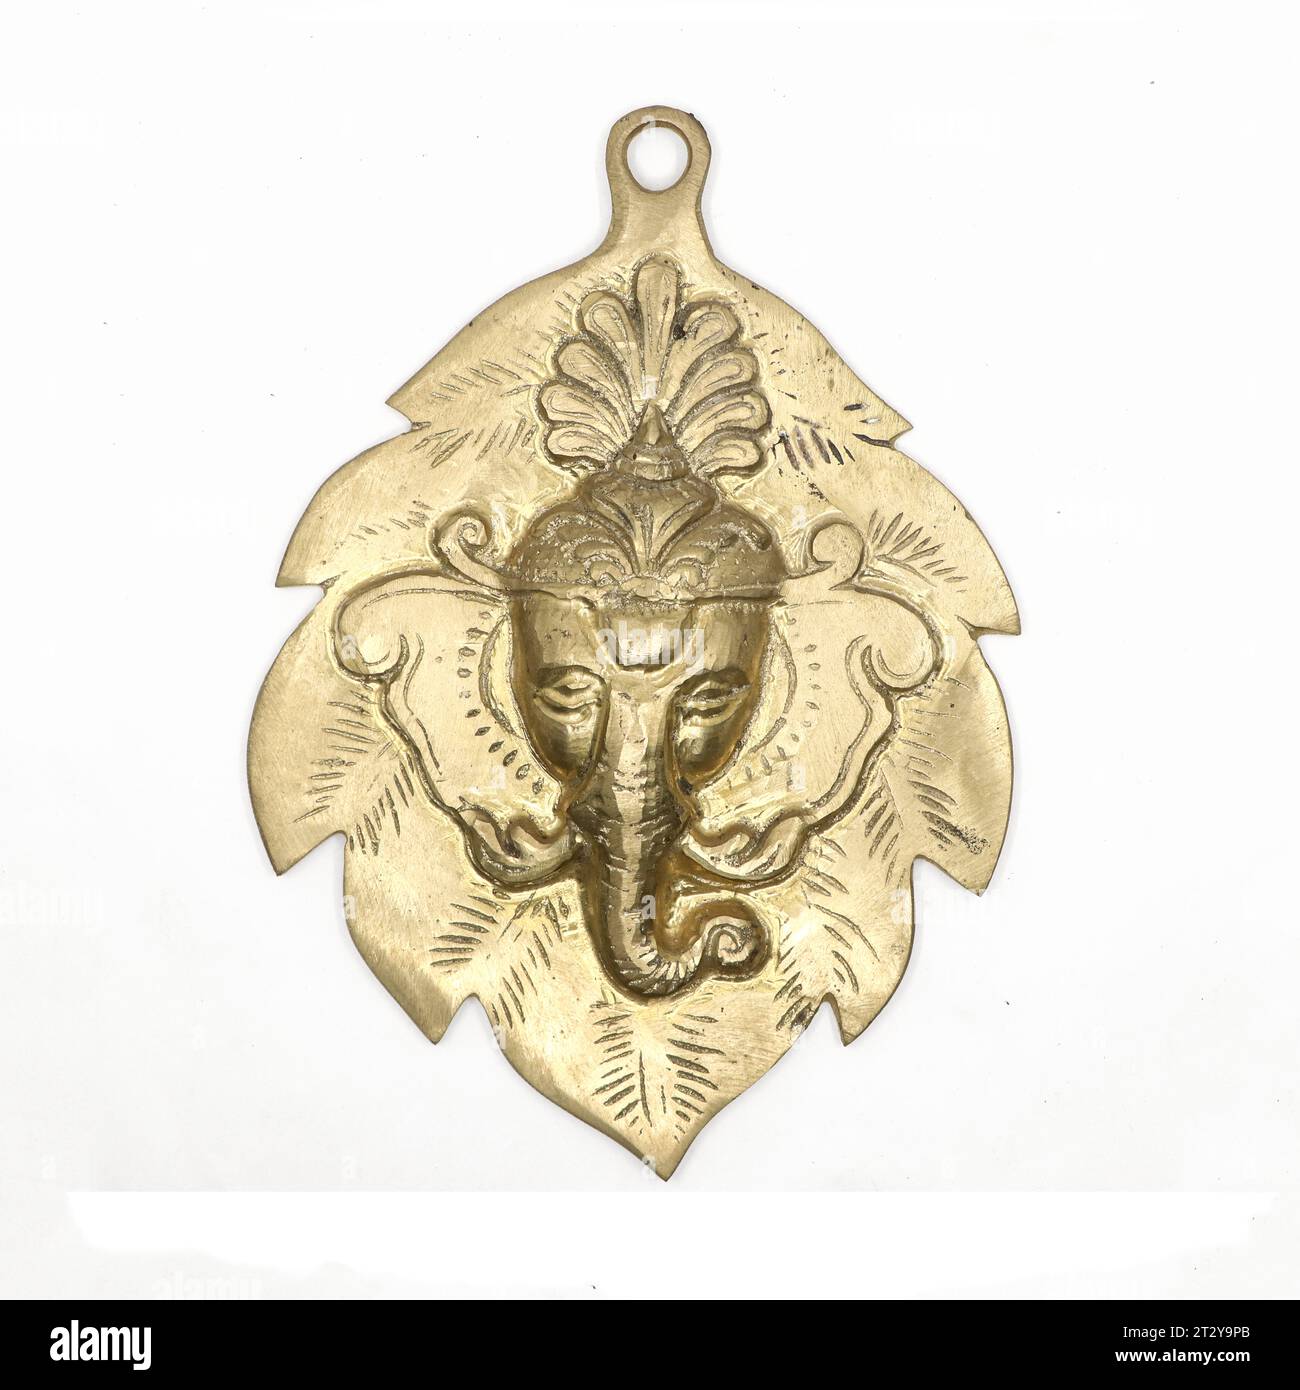 hindu god lord ganesha face antique sculpture on a leaf used as wall hanging display in gold isolated Stock Photo